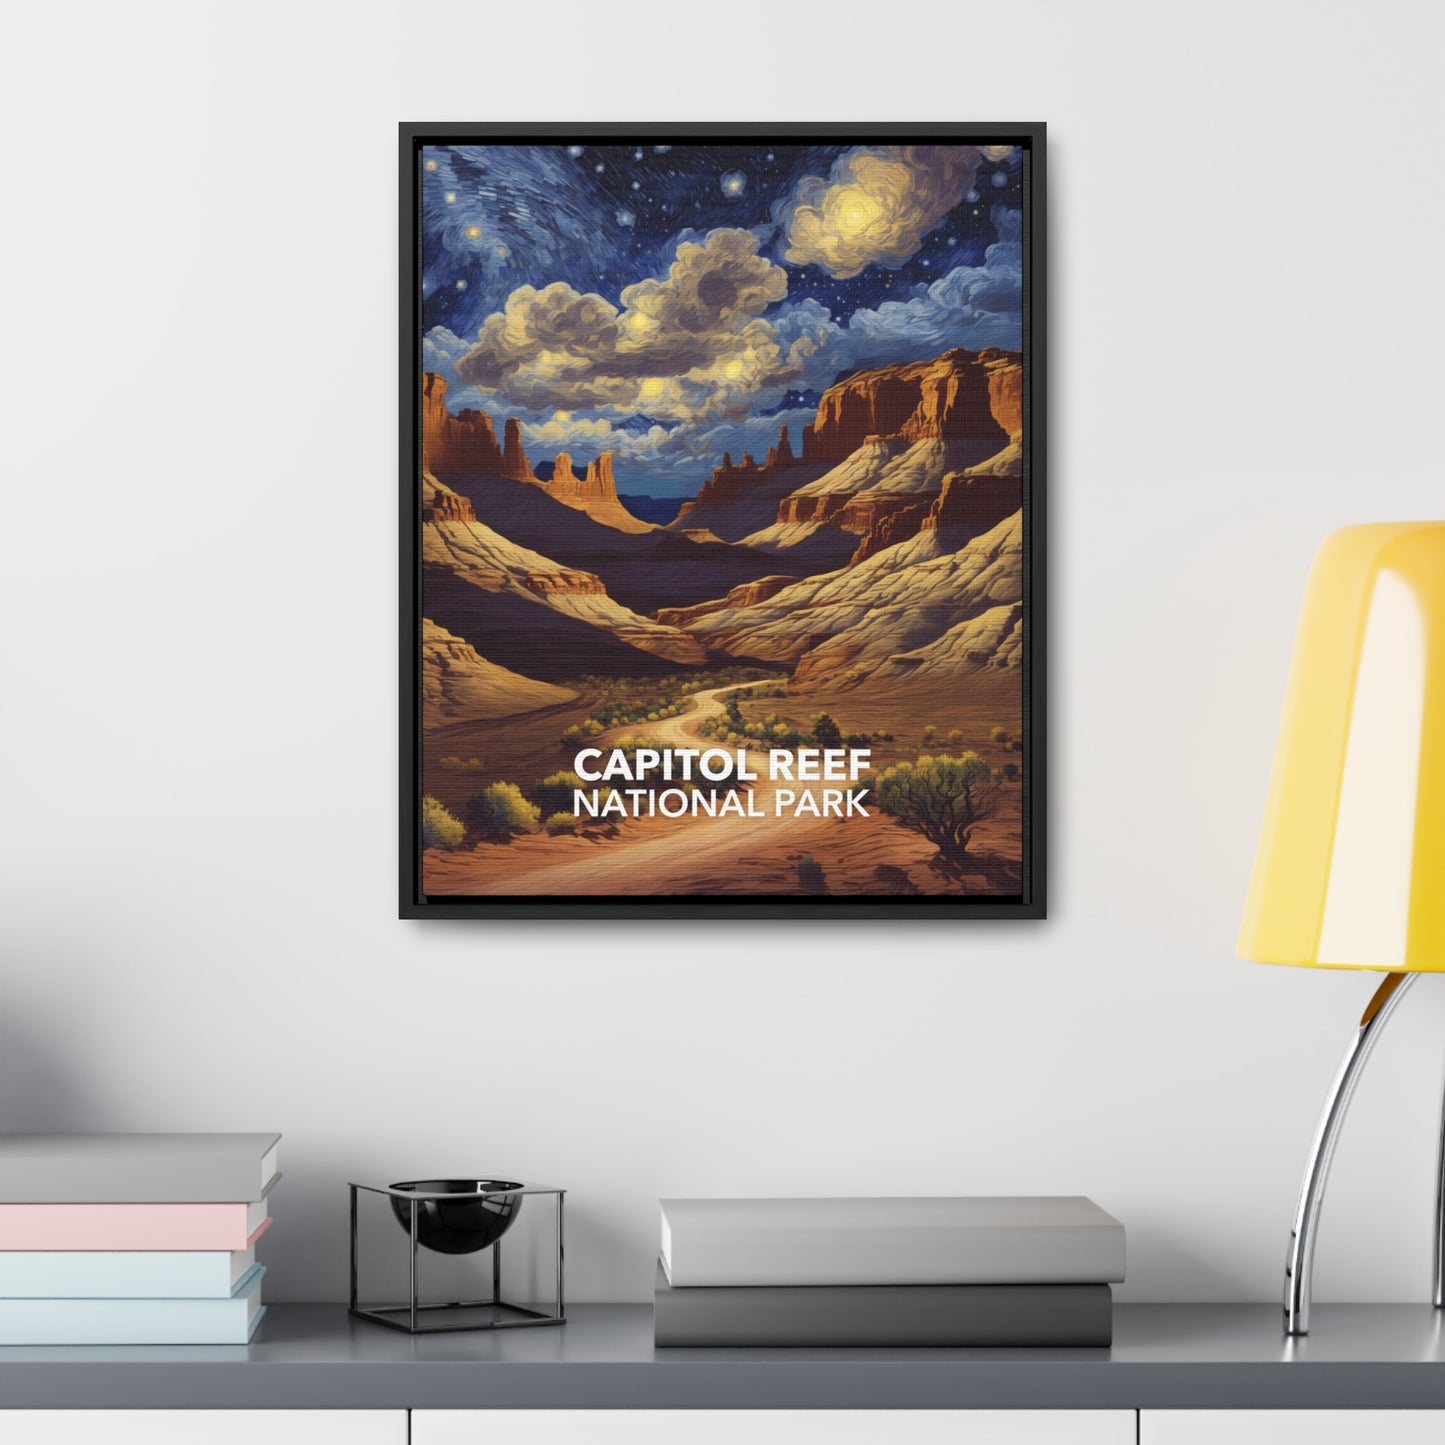 Capitol Reef National Park Framed Canvas - The Starry Night